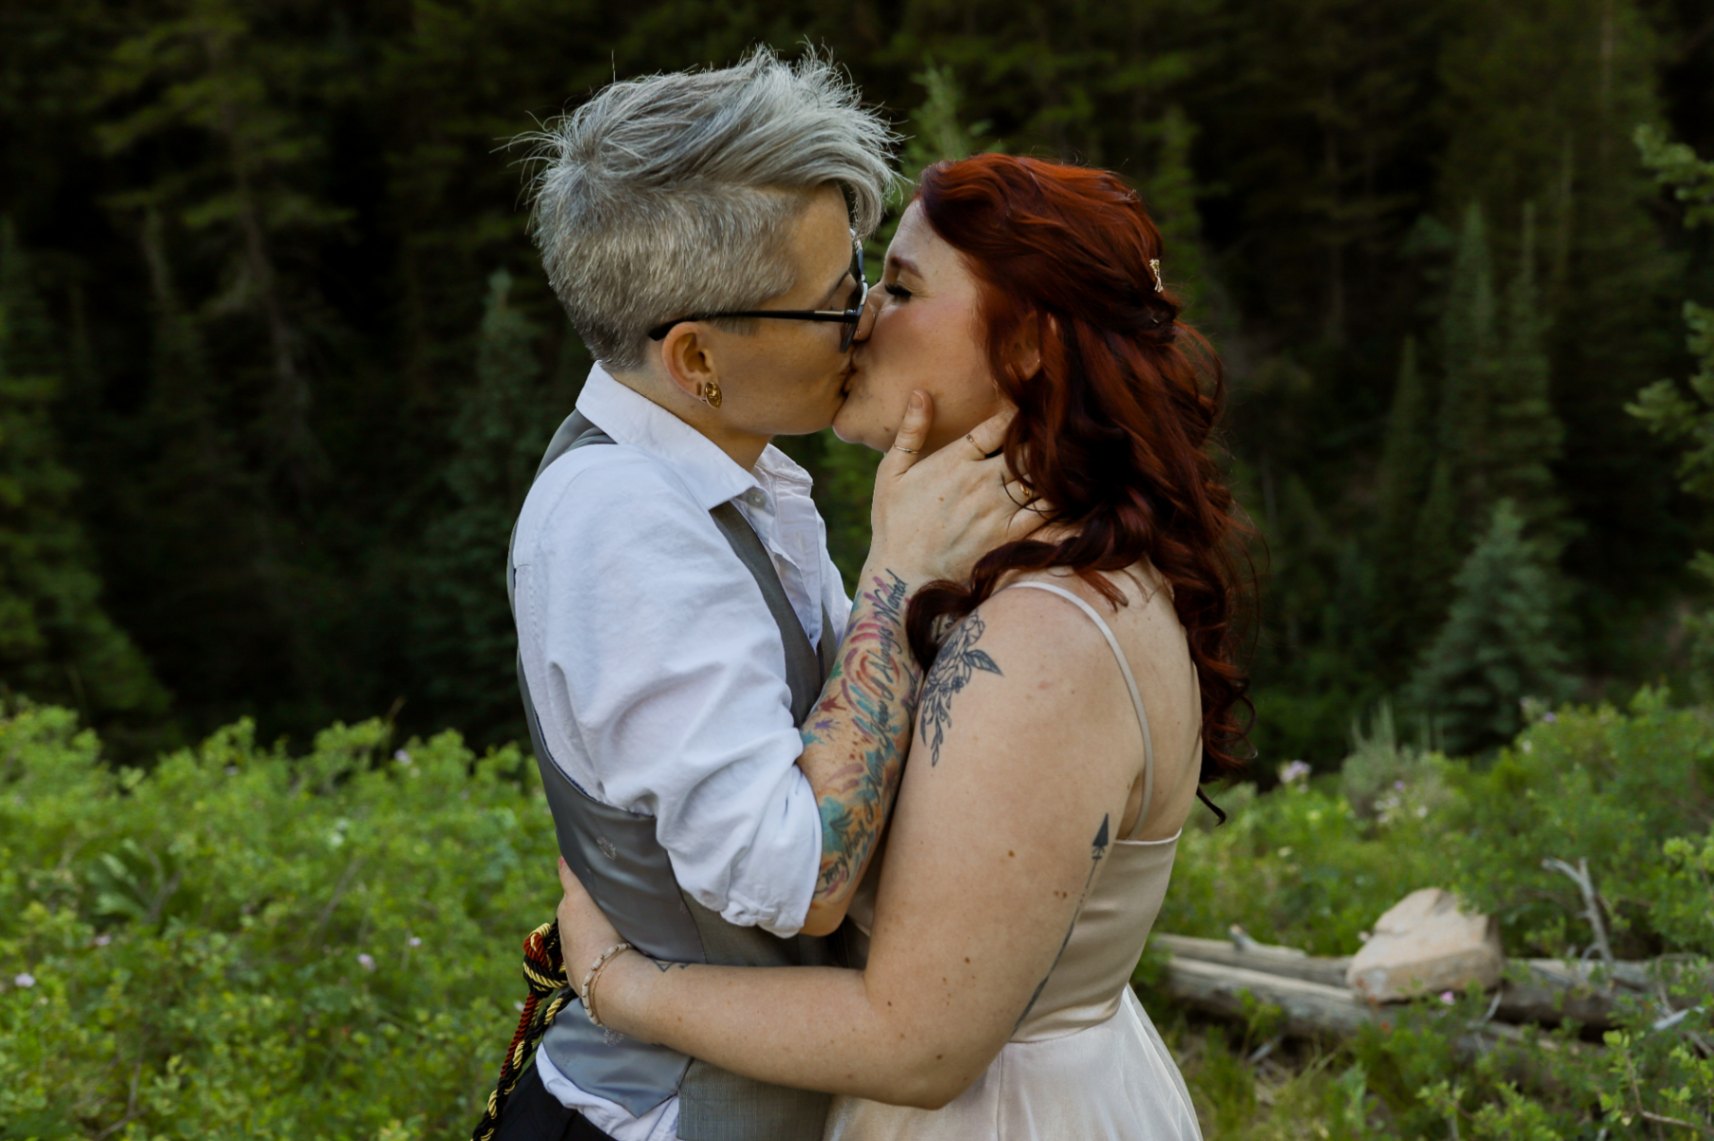 Two lesbian brides (both white, one with short gray hair, one with long dark red hair) kiss during their handfasting ceremony. They each have tattoos. The nonbinary bride with short gray hair is wearing a gray vest, a white shirt and dark pants, as well as glasses. The red-haired bride is wearing a light pink dress with spaghetti straps.